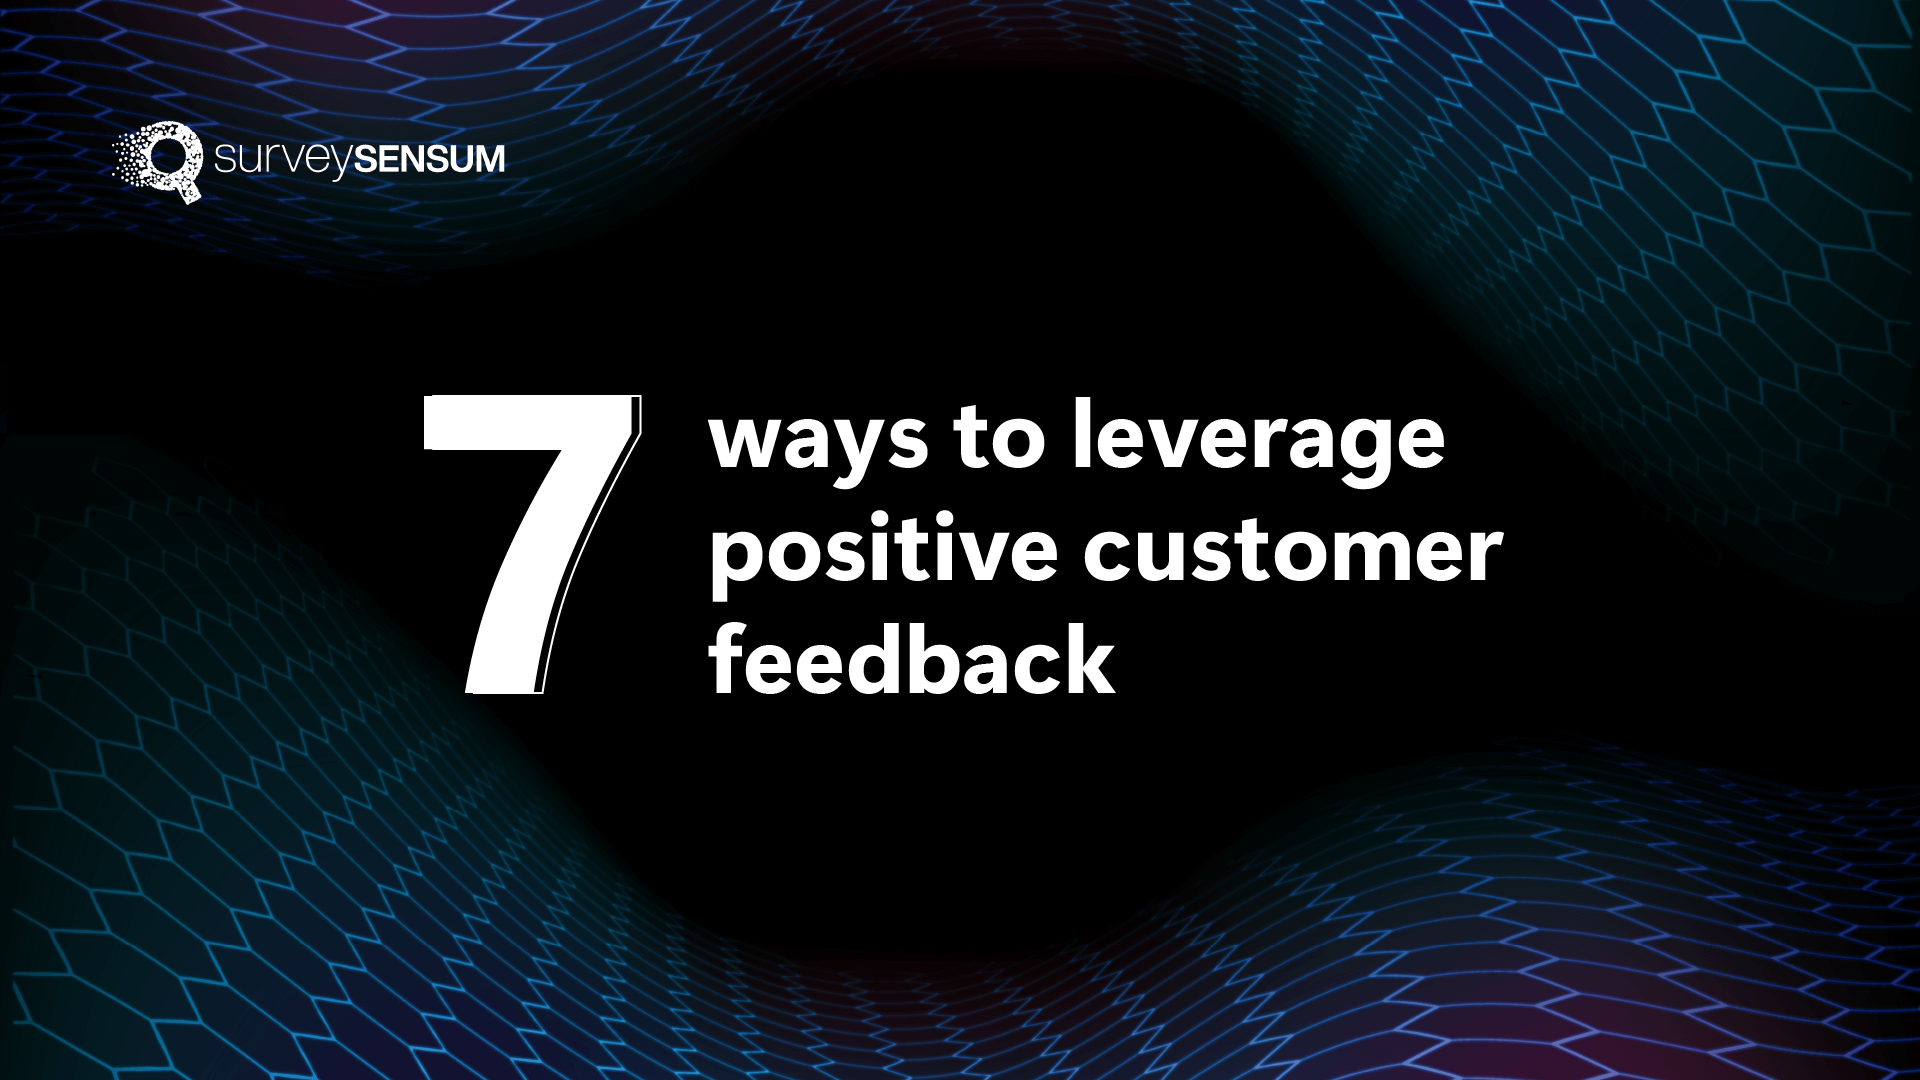 How to Benefit from Positive Customer Feedback